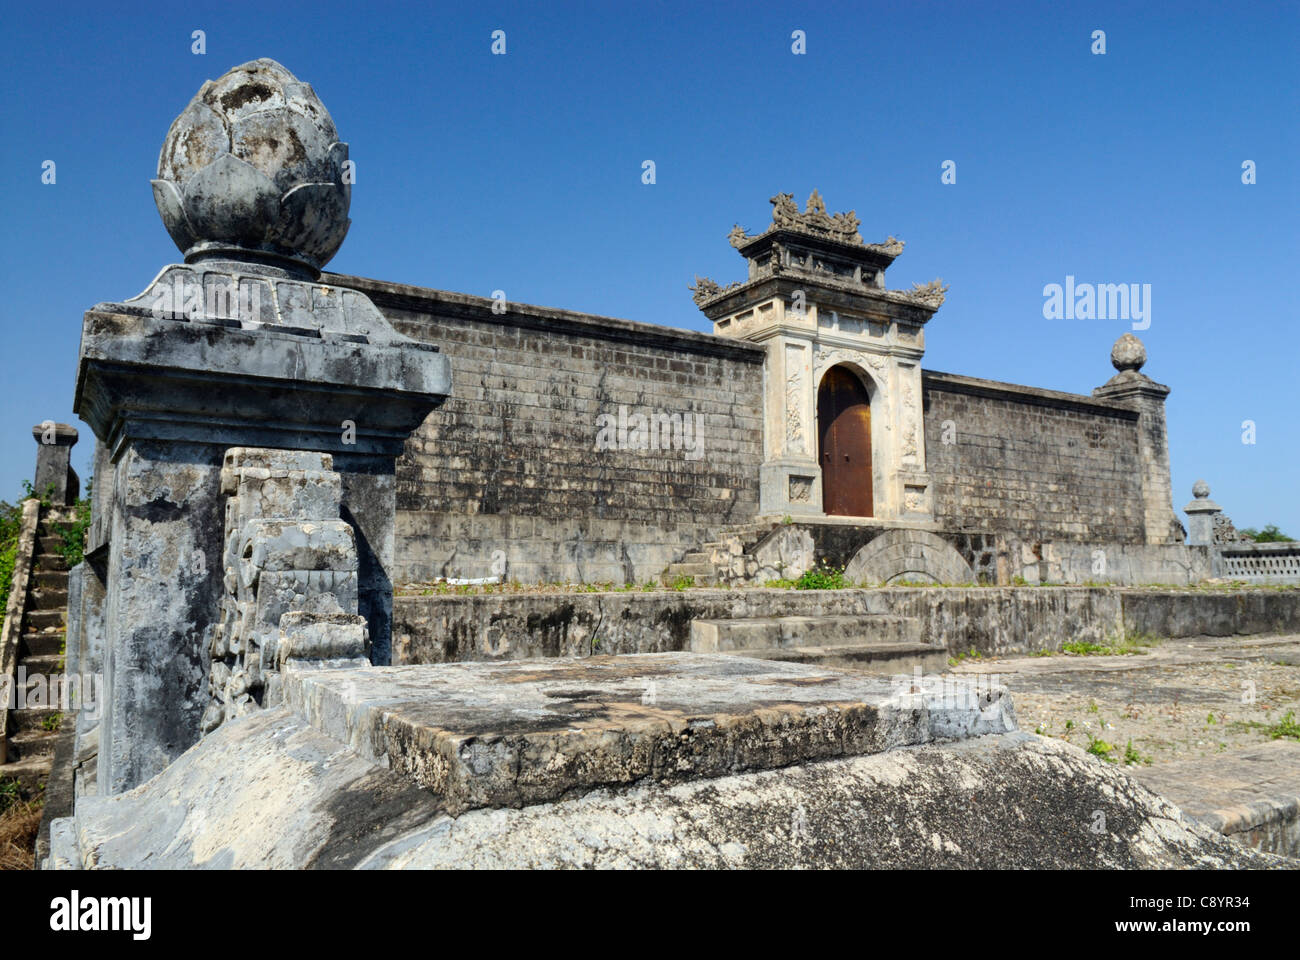 Asia, Vietnam, Hue. Royal tomb of Dong Khanh. Designated a UNESCO World Heritage Site in 1993, Hue is honoured for its comple... Stock Photo